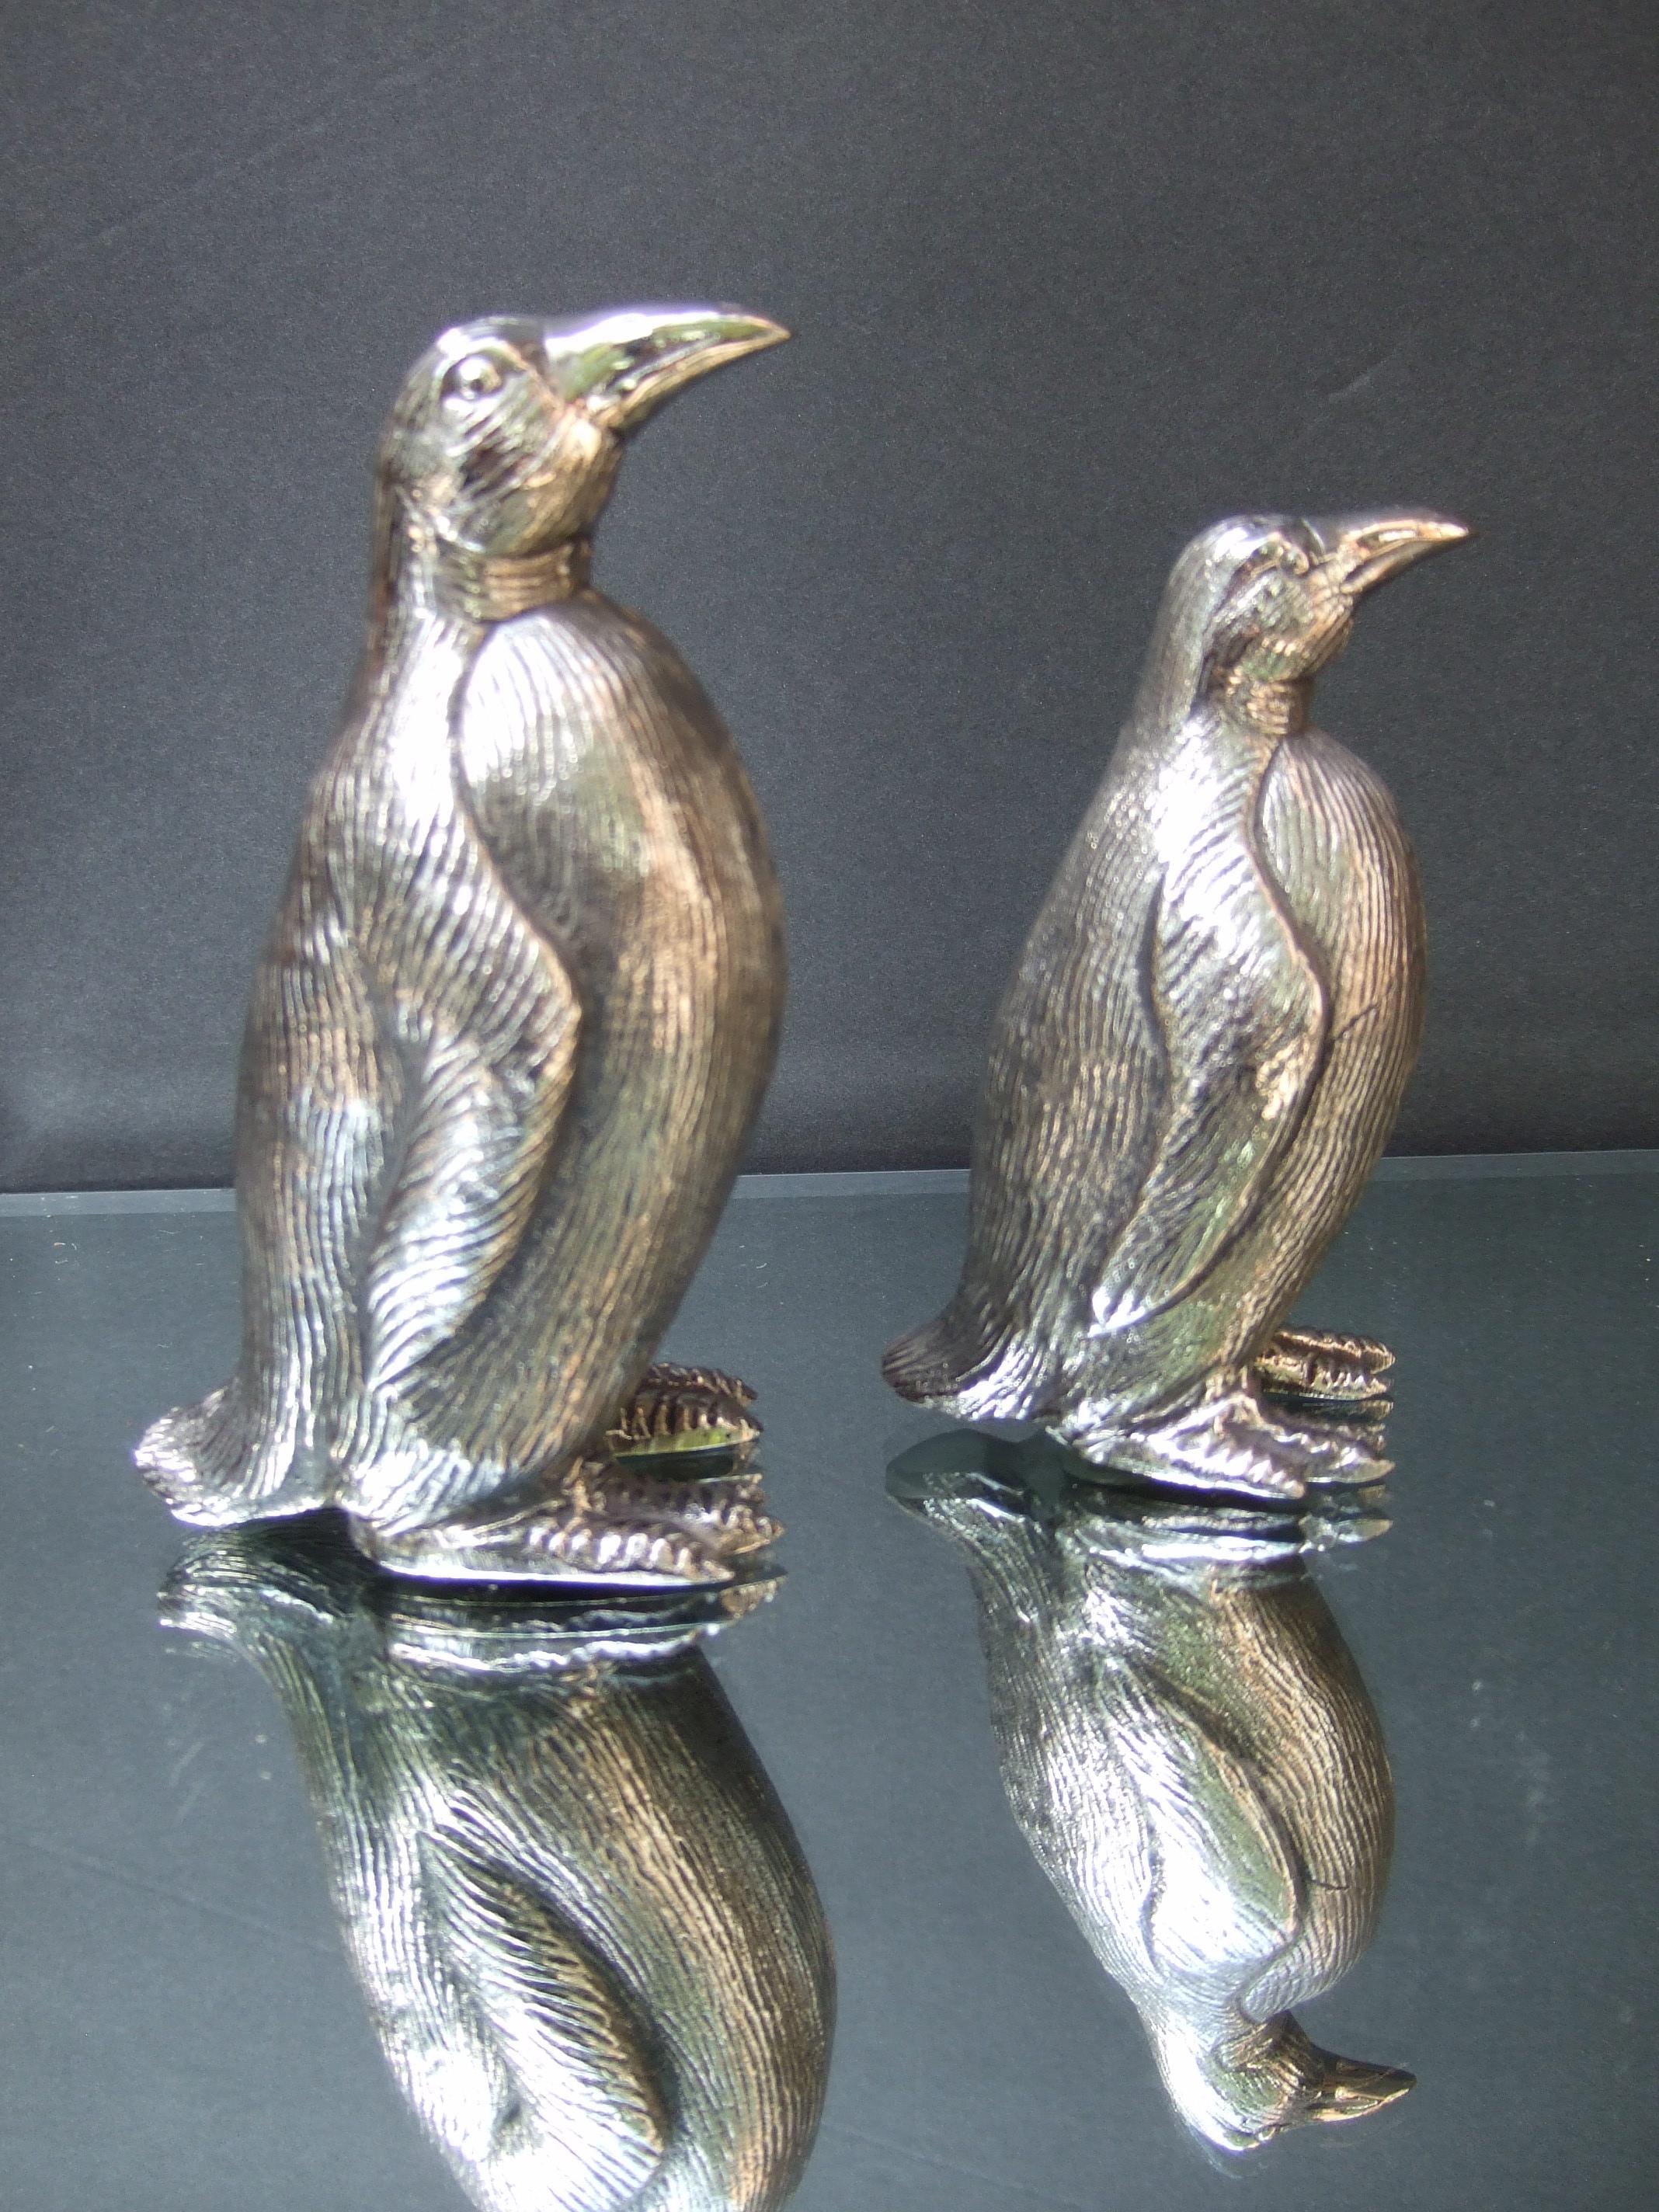 Gucci Italy Elegant pair of silver metal penguin salt & pepper shakers c 1970s
The endearing pair of stylized penguin figures are designed in graduated heights 
Embellished with etched detail that emulates their feathers 
The pair of penguin salt &